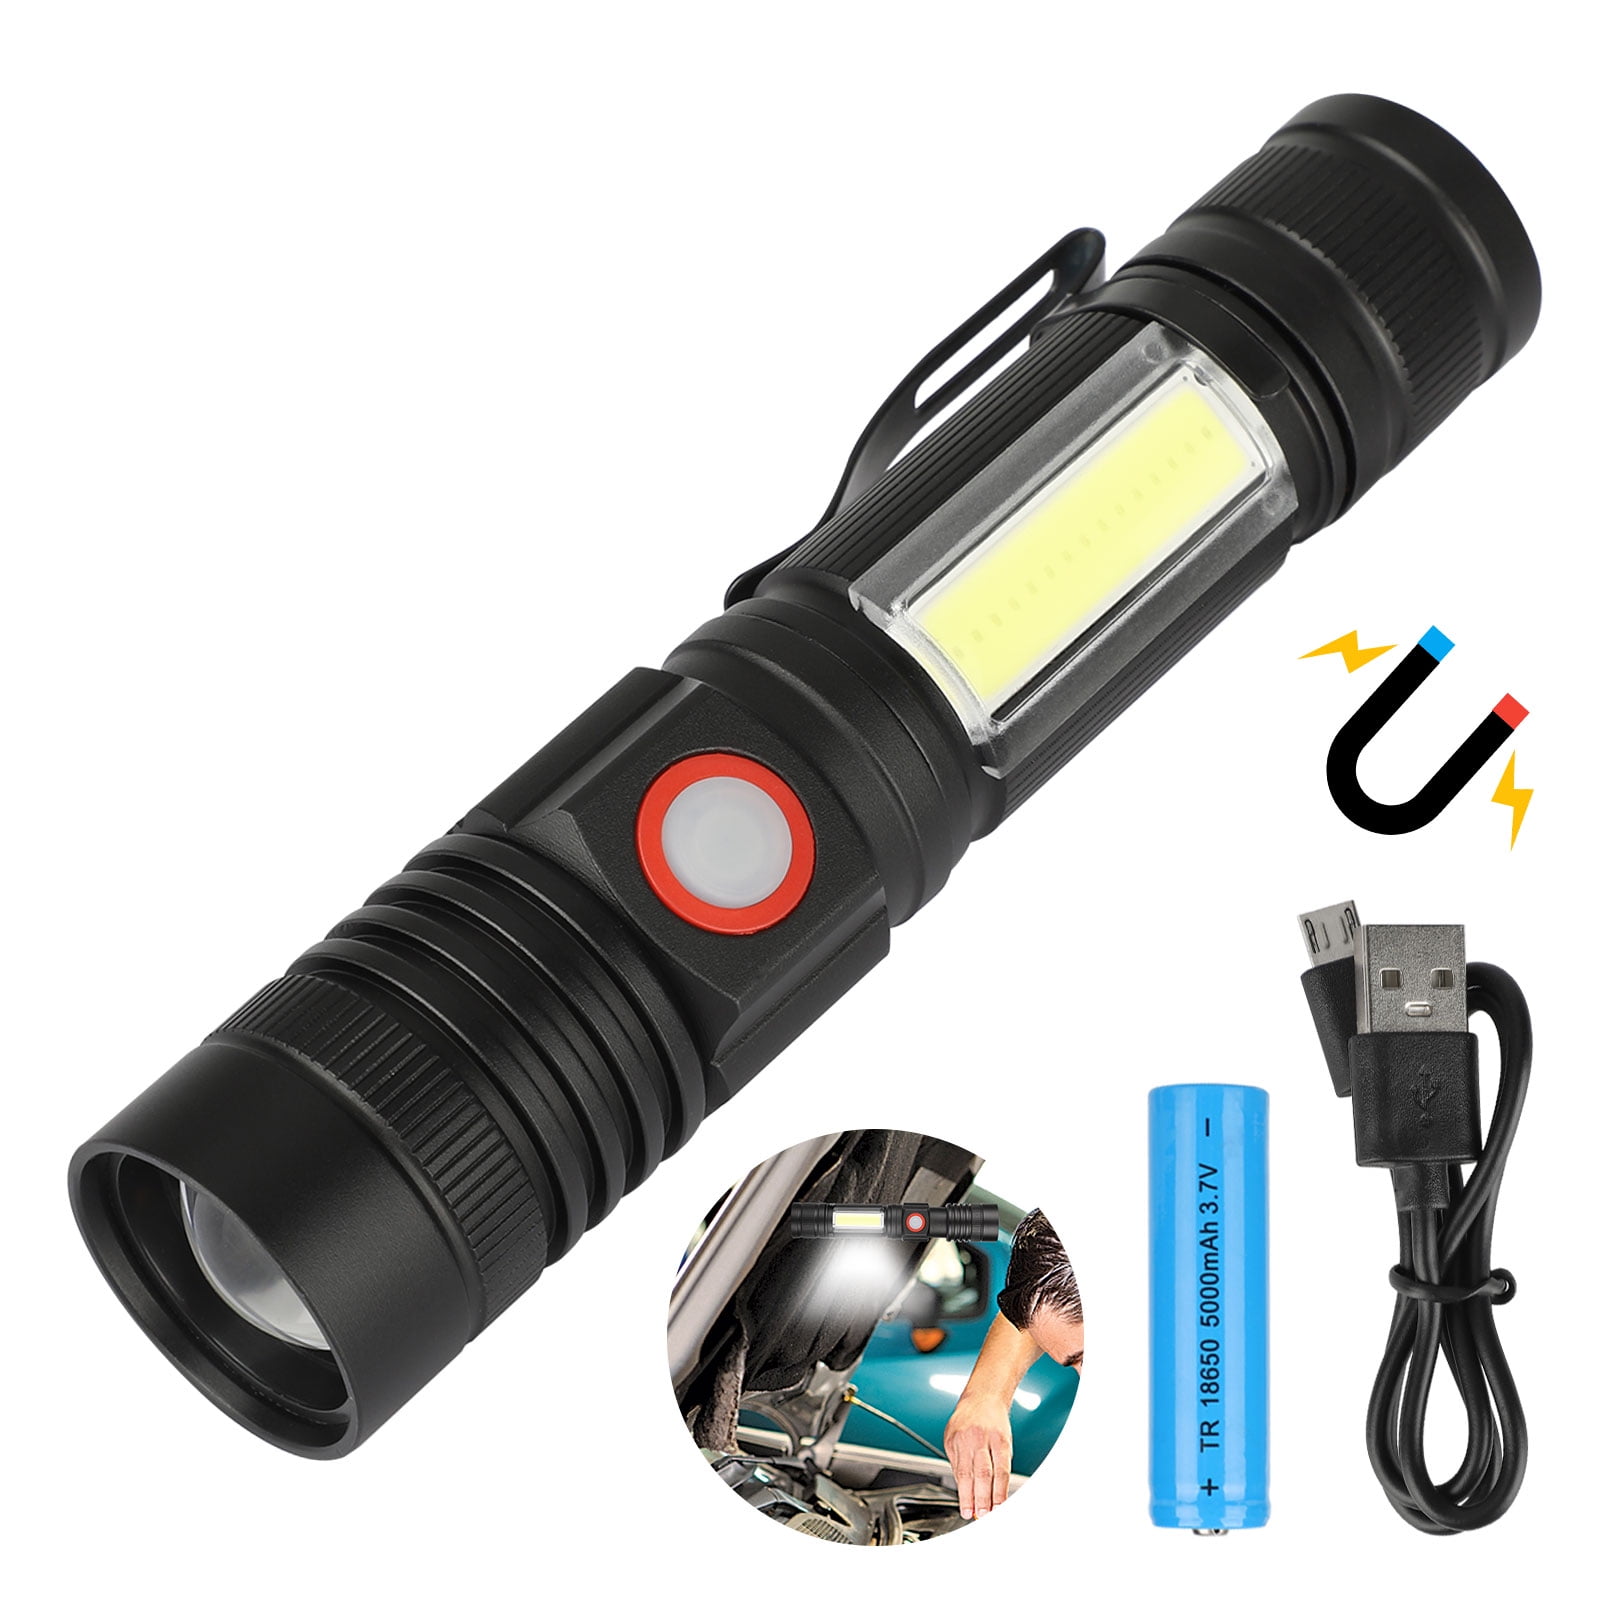 LEEBA 90000 lumens XHP50 LED Flashlight,USB Charging,Telescopic Zoom Tactical Torch,26650 Rechargeable Battery